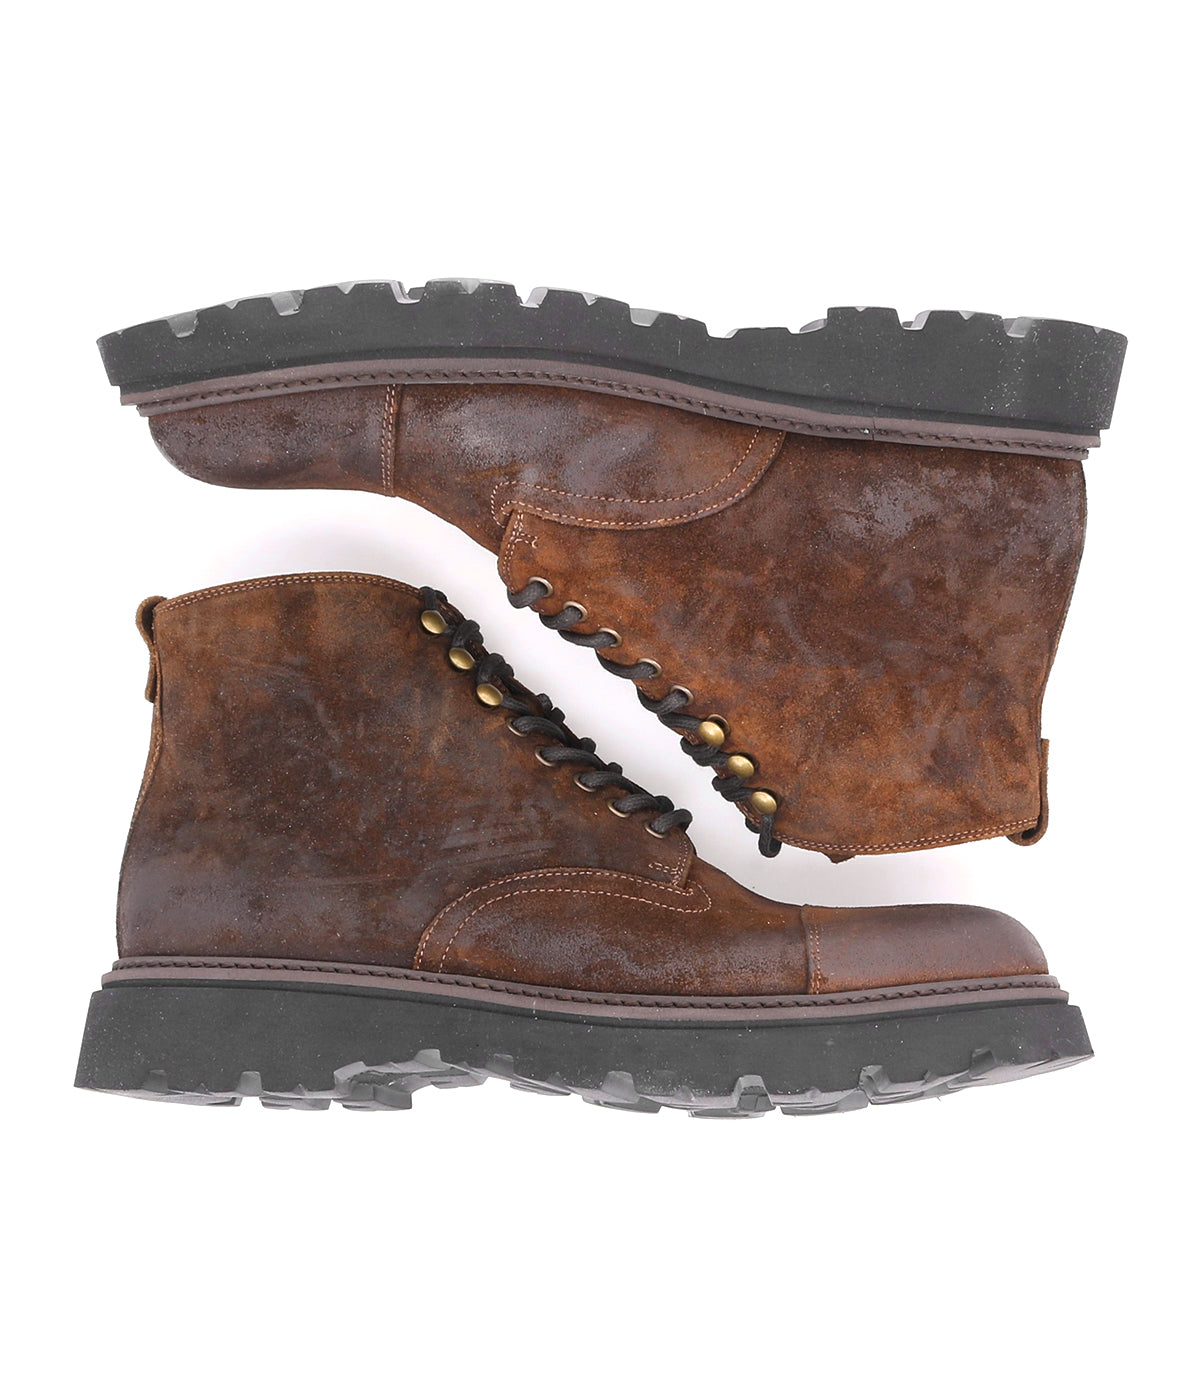 Bed Stu's Goer Italian work-style boots in oiled suede leather, emphasizing durability, on a white background.